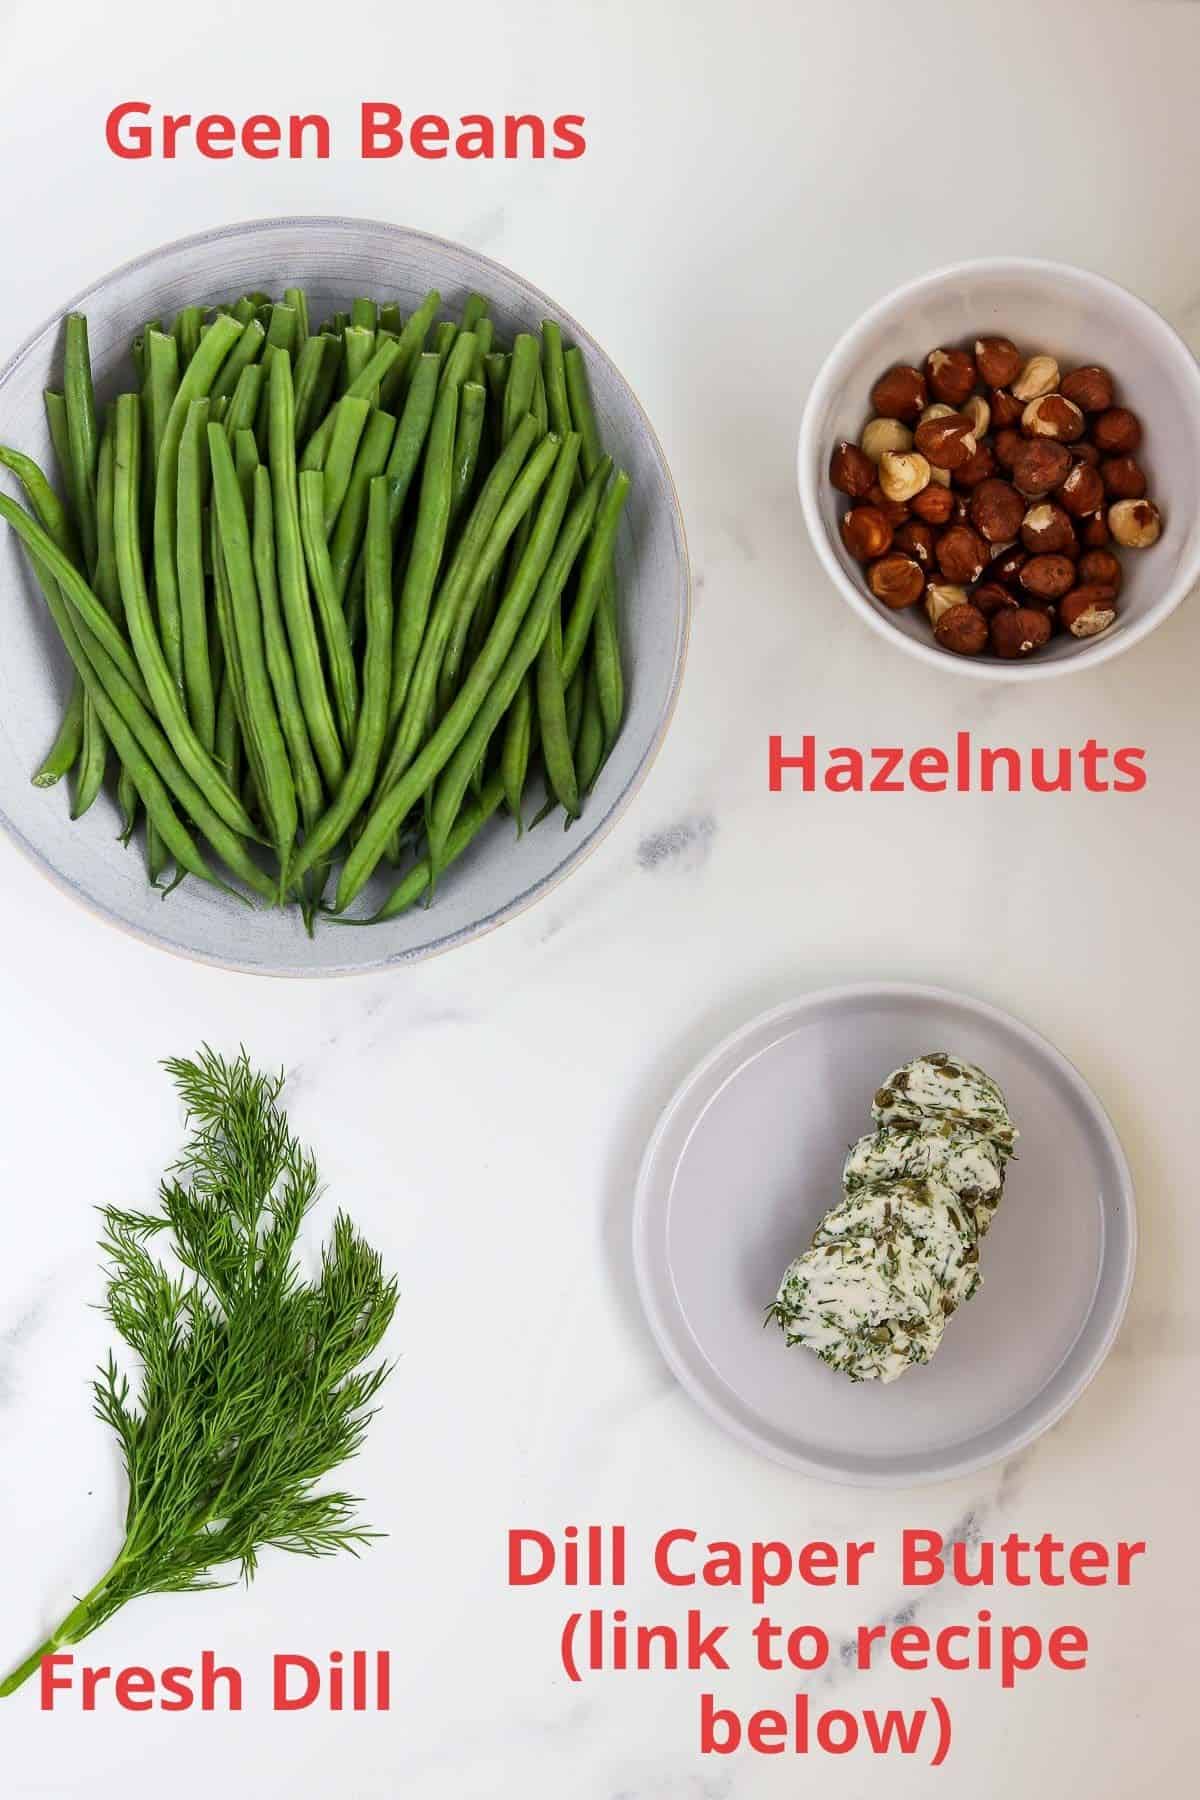 Labeled ingredients for Green Beans with Dill Caper Butter and Toasted Hazelnuts